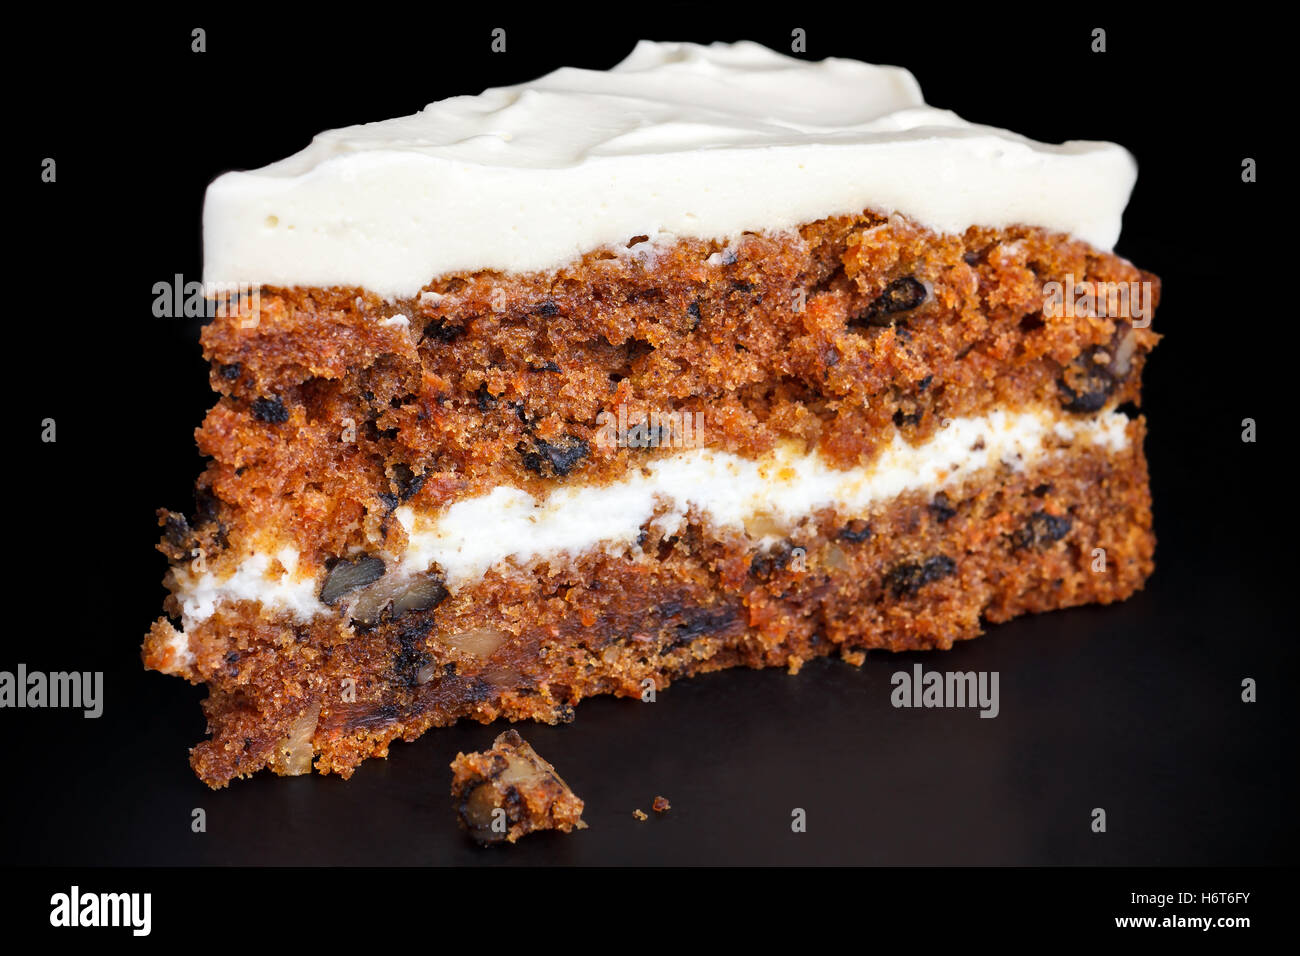 Slice of carrot cake with rich frosting. Isolated on black. Stock Photo